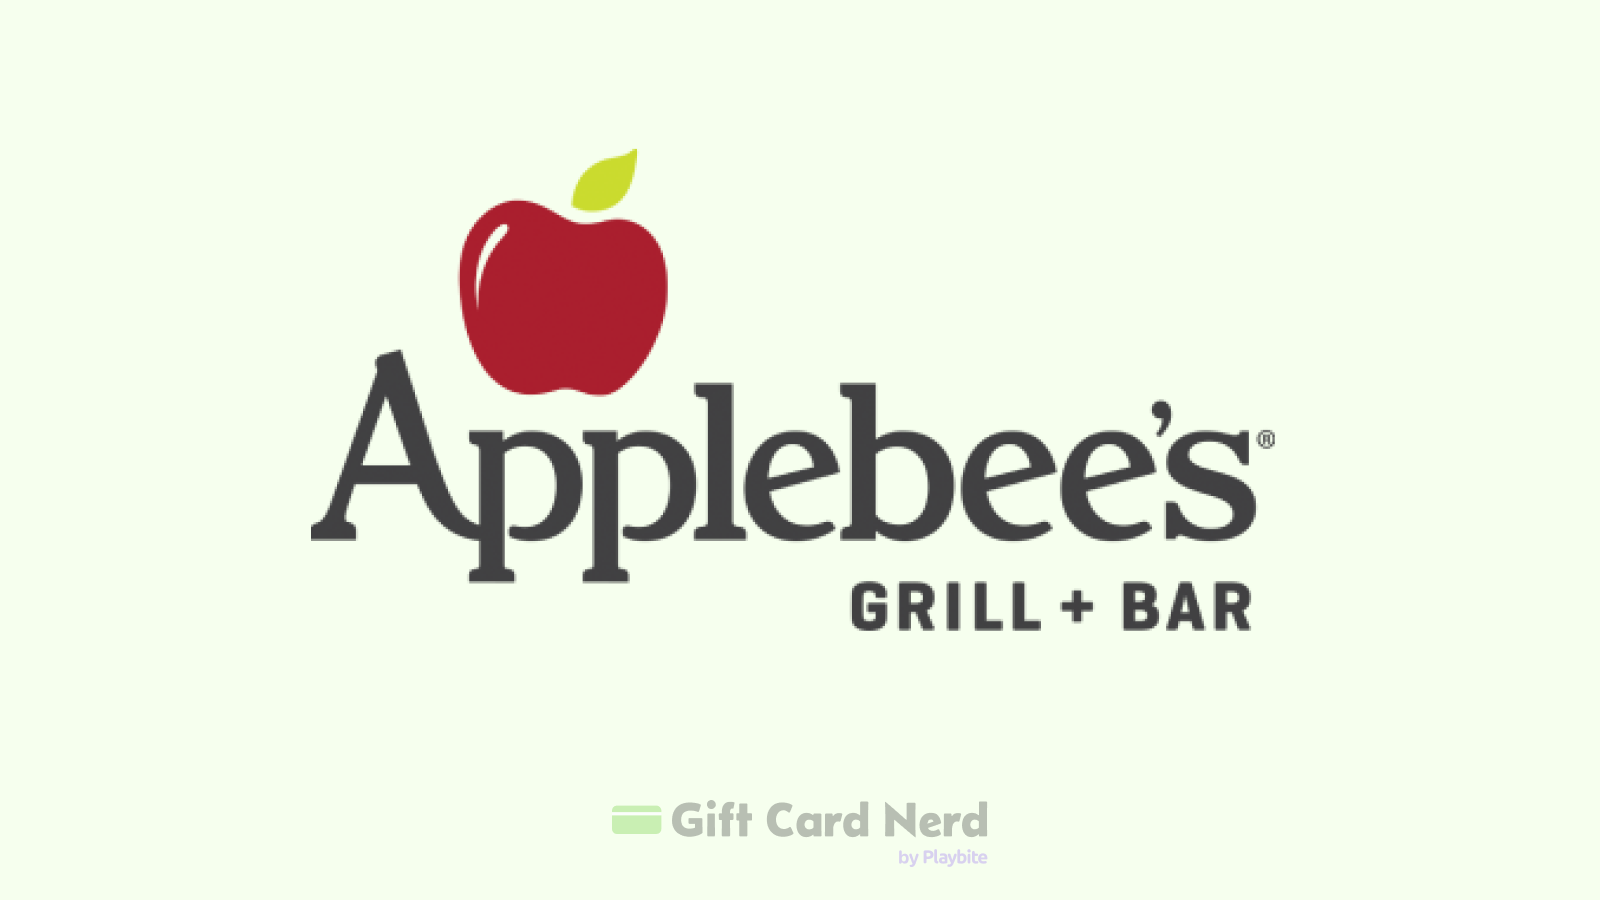 How to Check Your Applebee&#8217;s Gift Card Balance